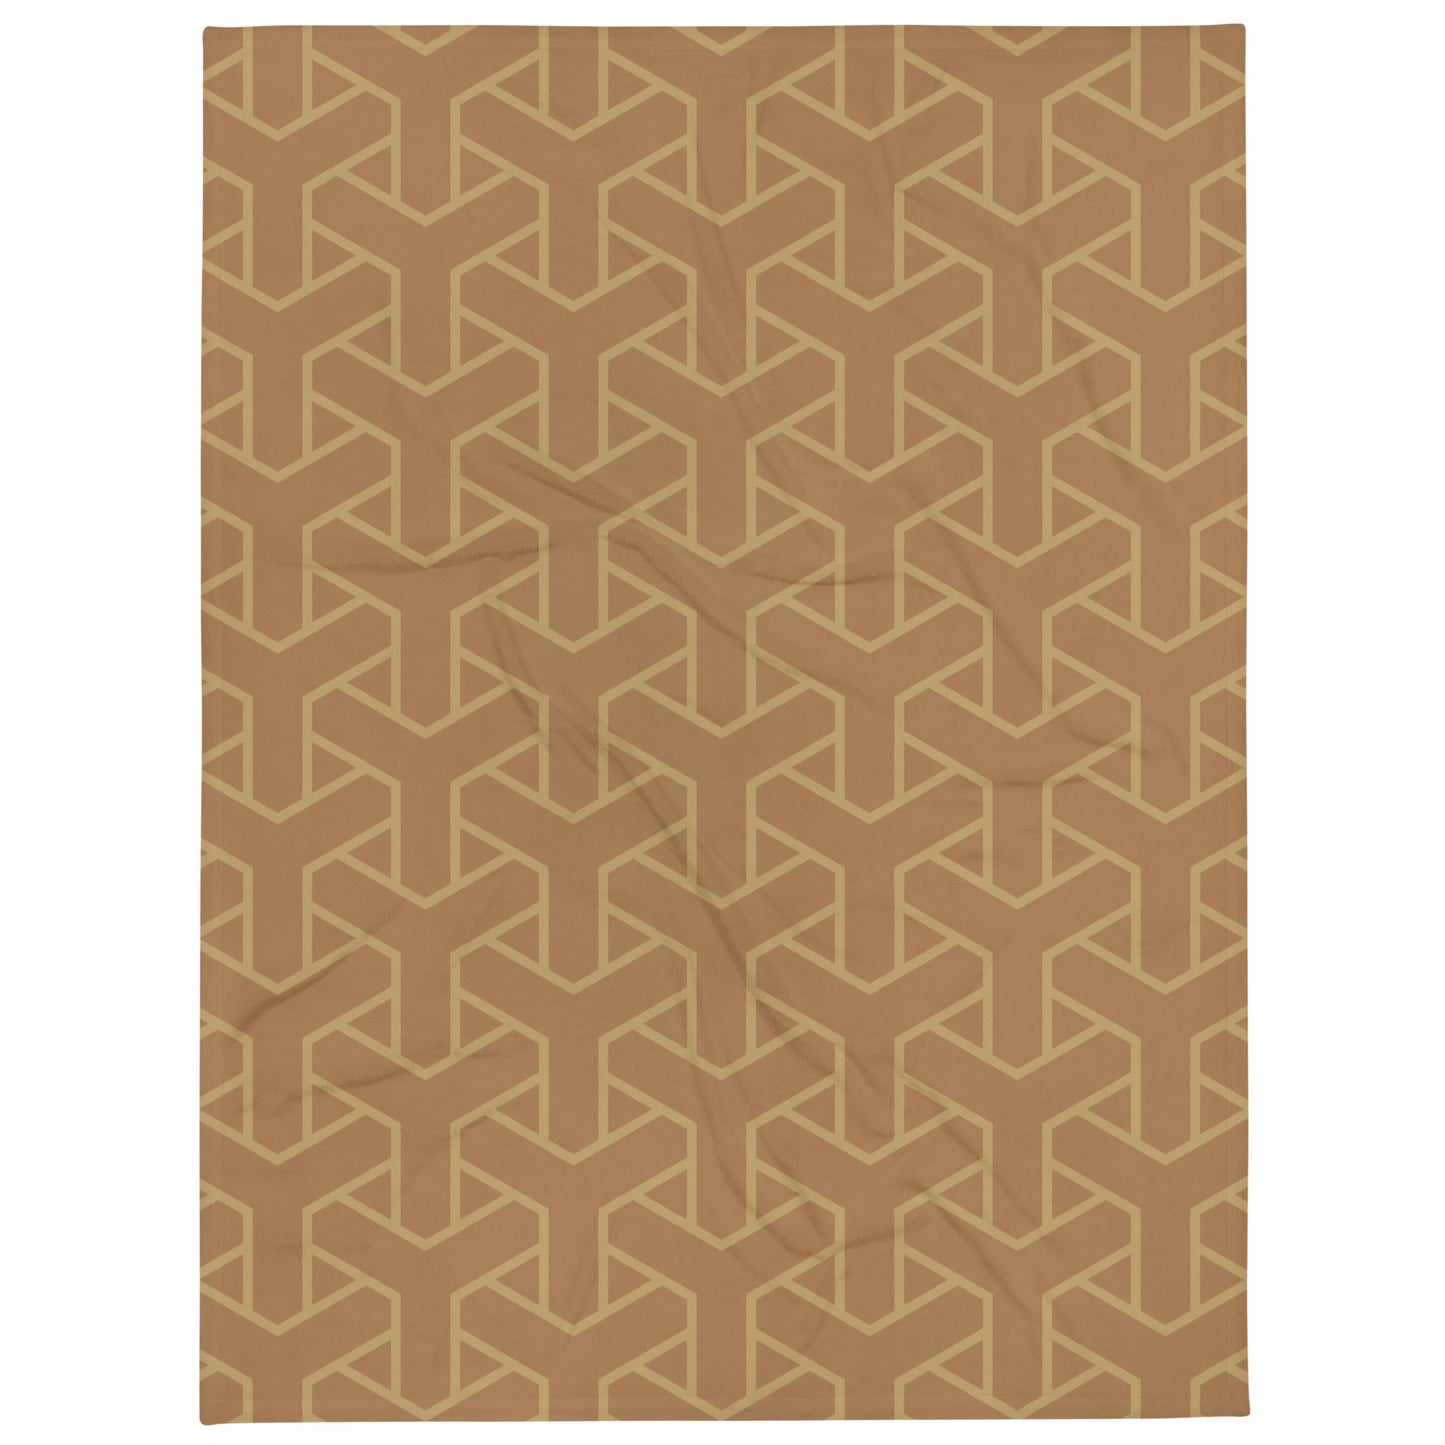 Retro Brown pattern - Sustainably Made Throw Blanket